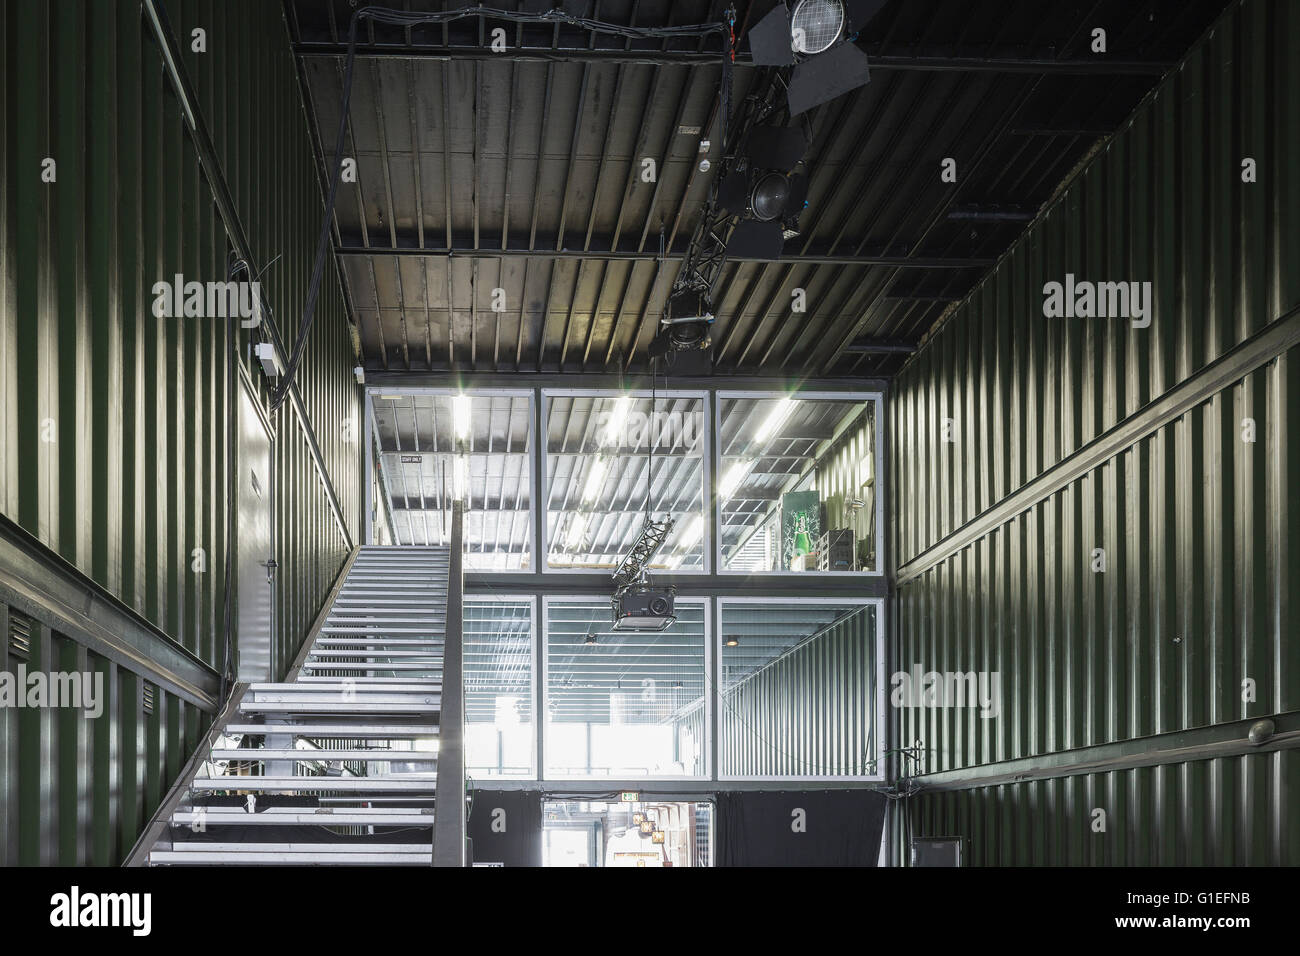 The Platoon Kunsthalle in Berlin by Graft Architects. View of a metal staircase inside the building. Stock Photo